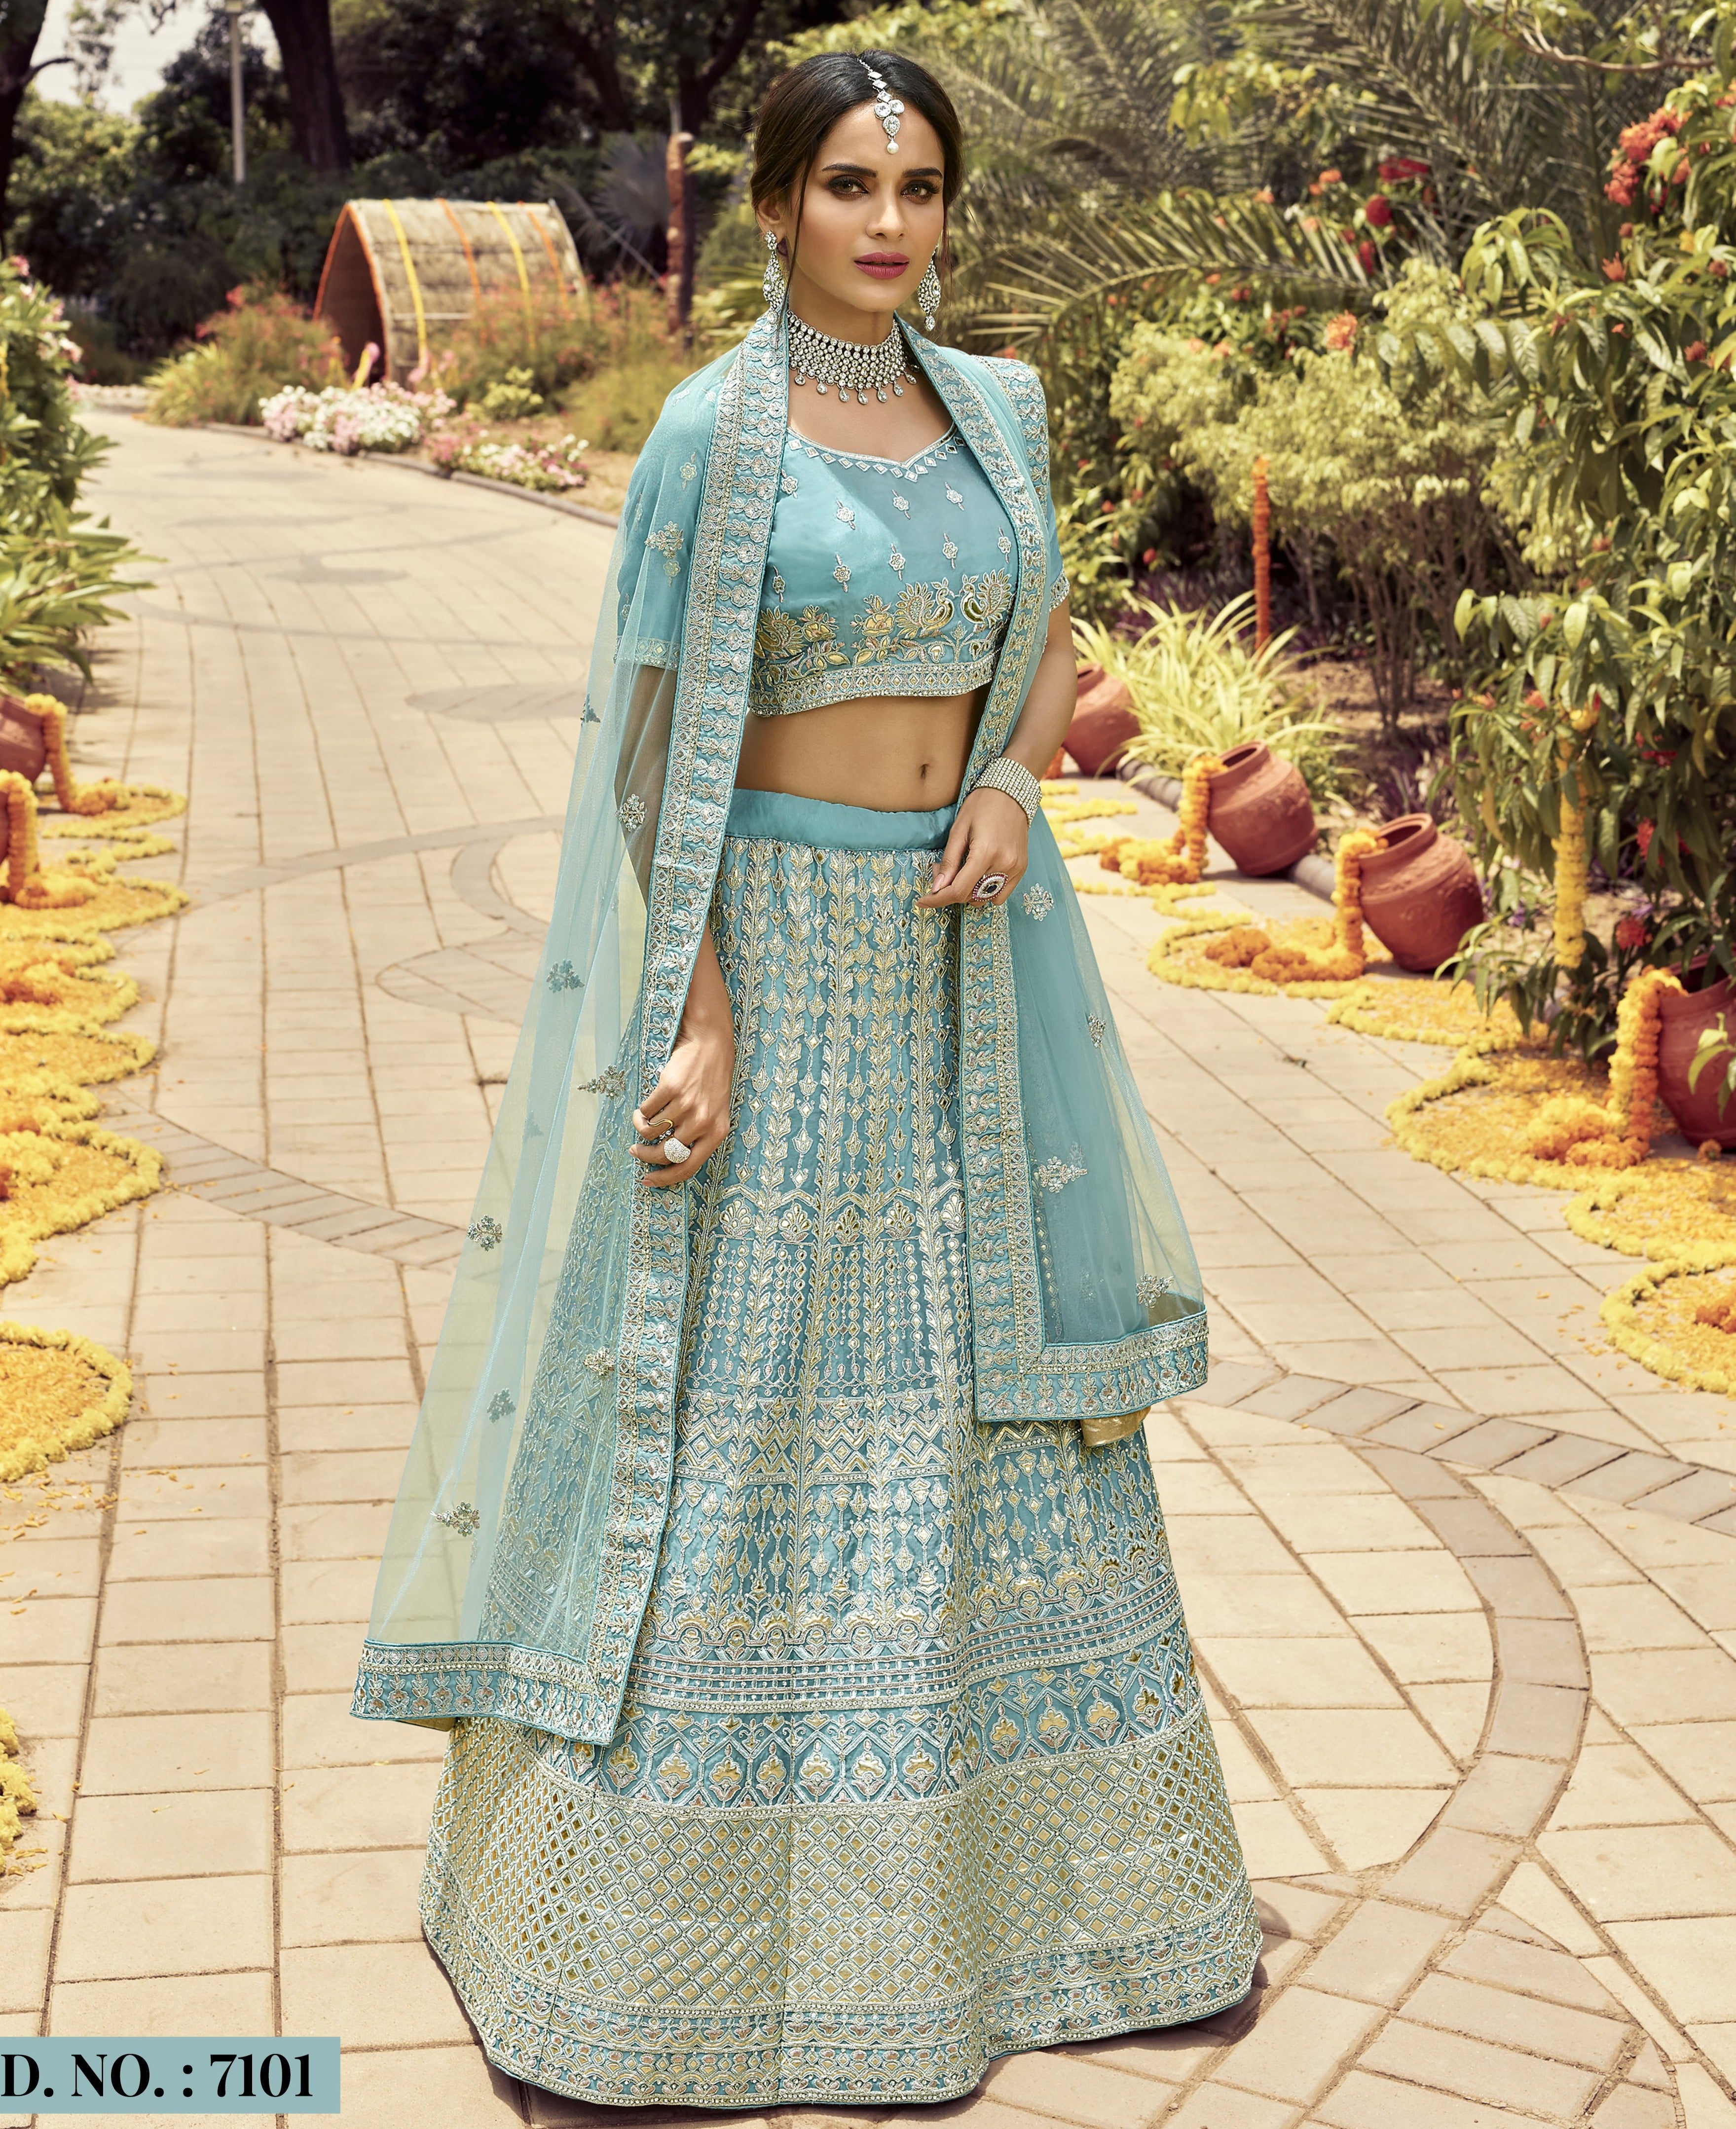 Floral organza lehenga with crop top - set of two by The Anarkali Shop |  The Secret Label